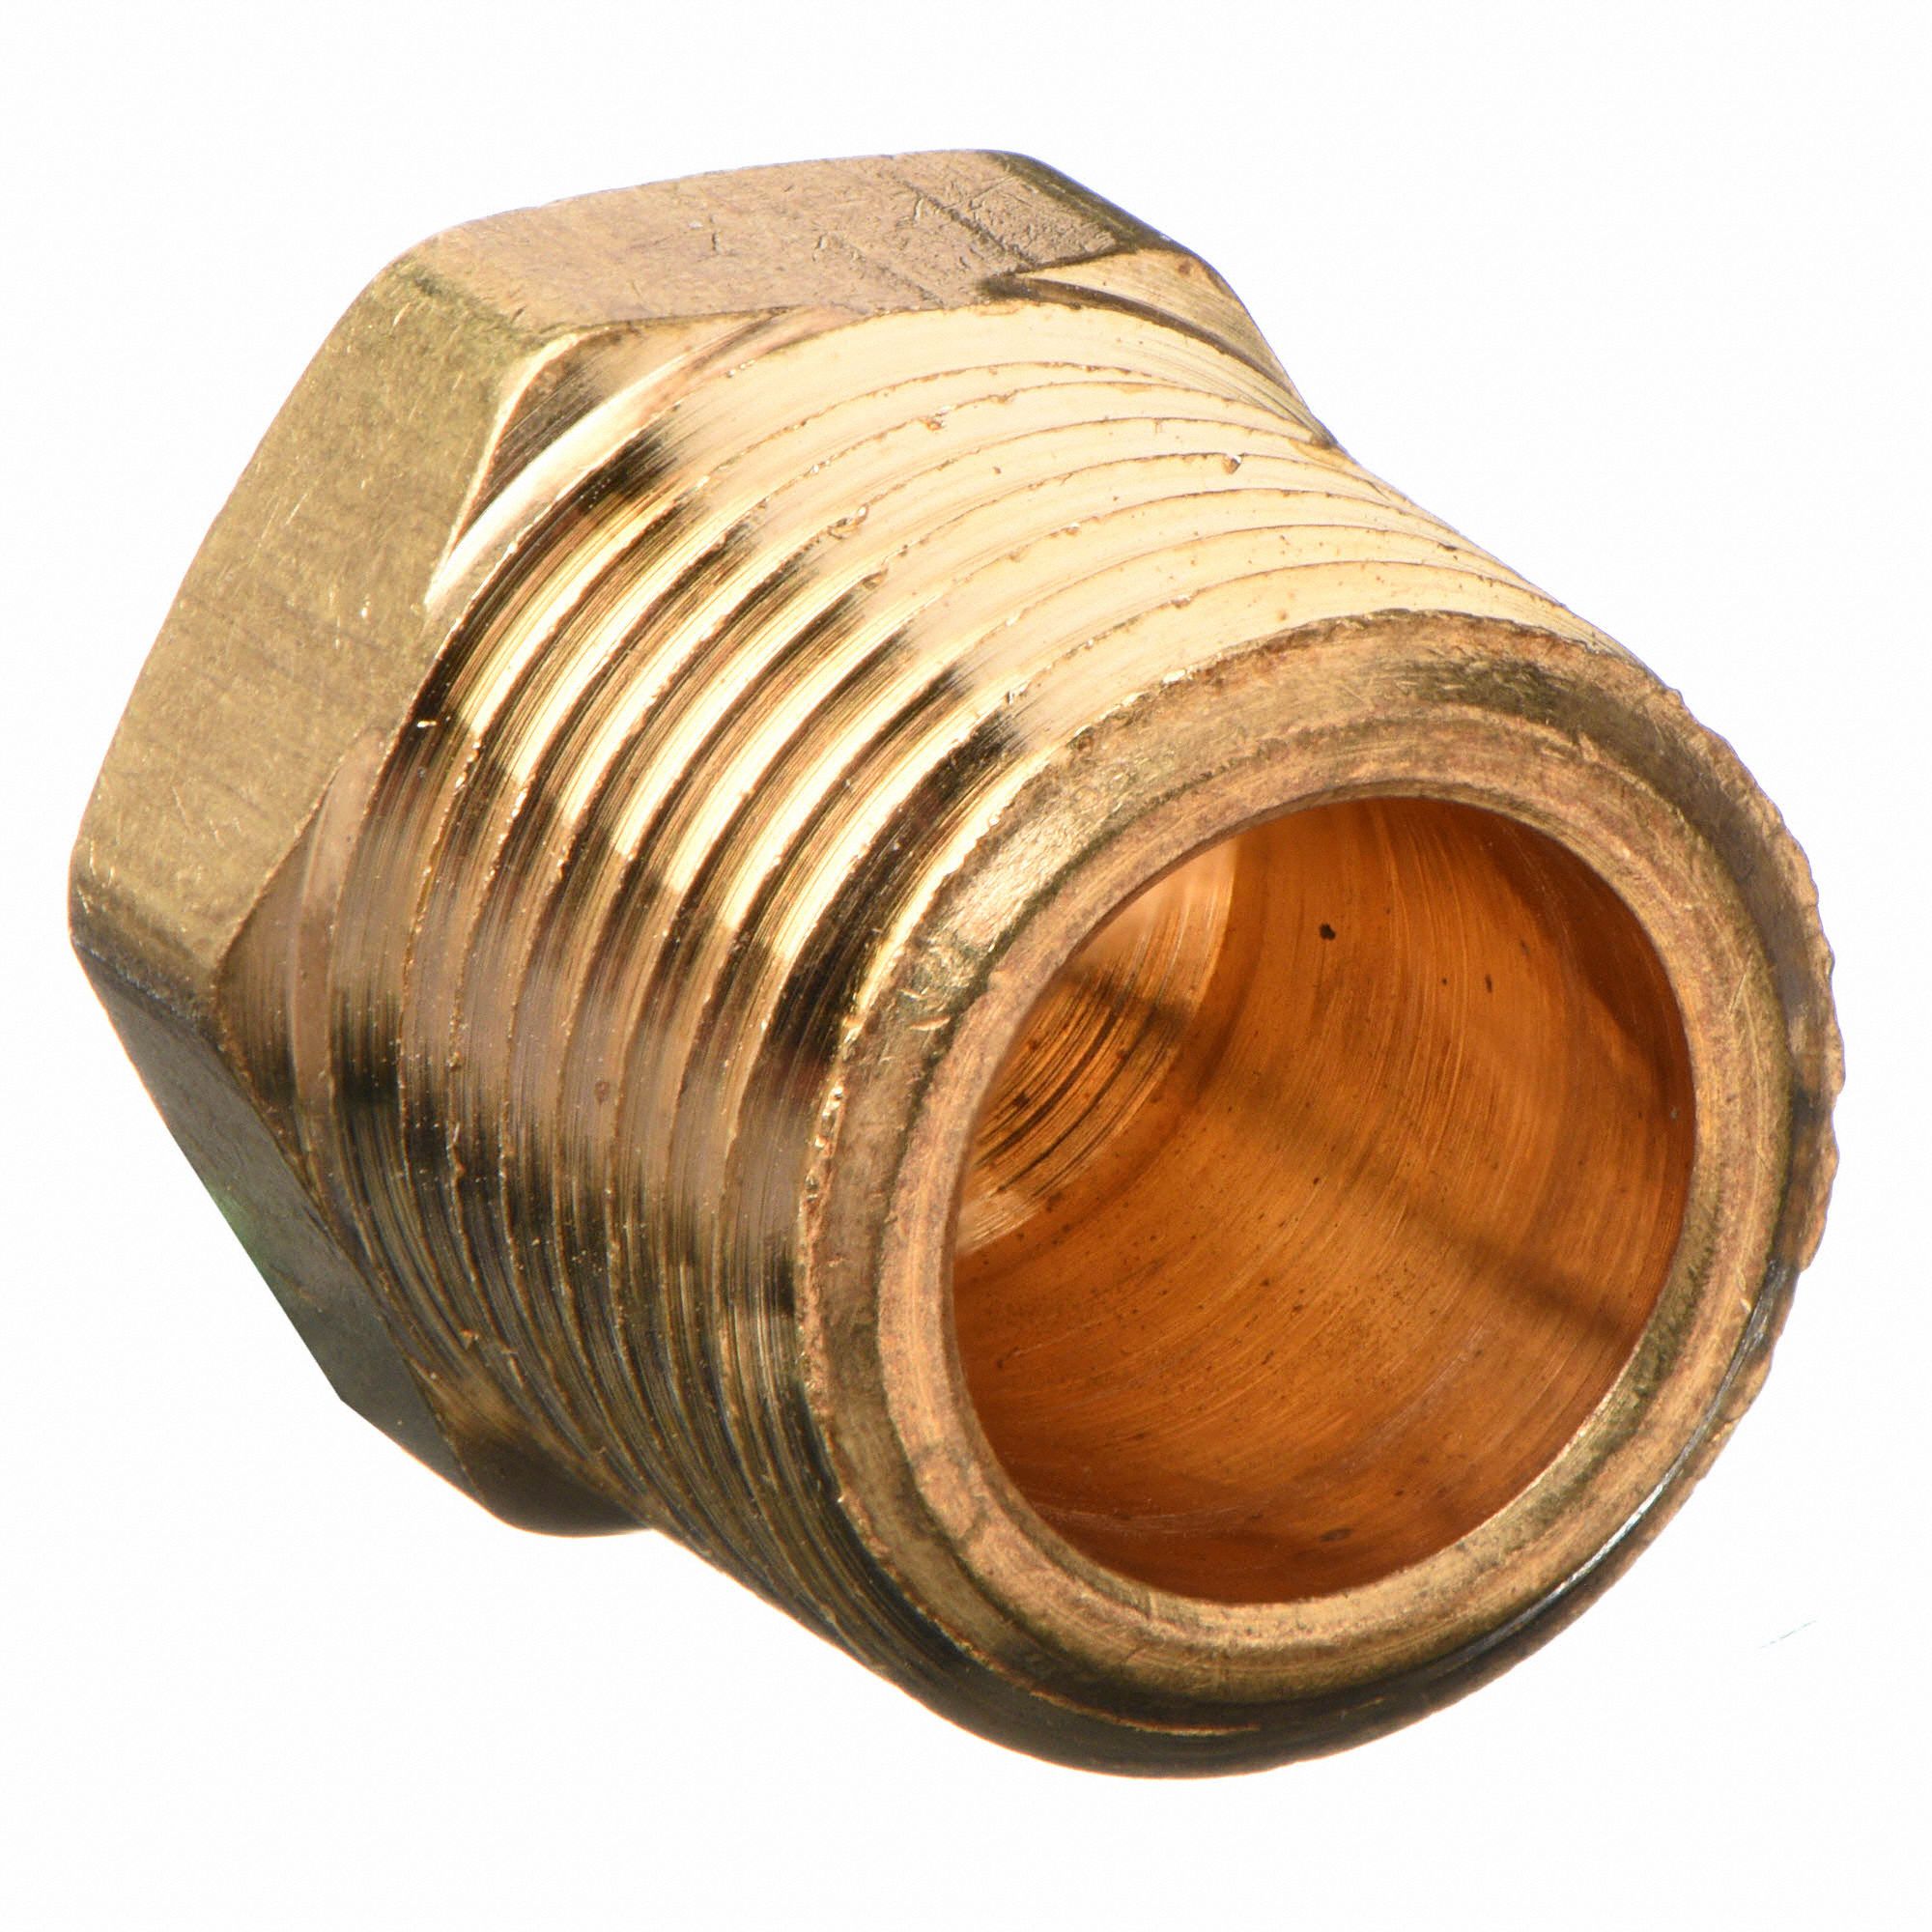 Details about   Brass Pipe Fitting Cored Hex Head Plug 3/8"G Male Connector Coupling Adapter 